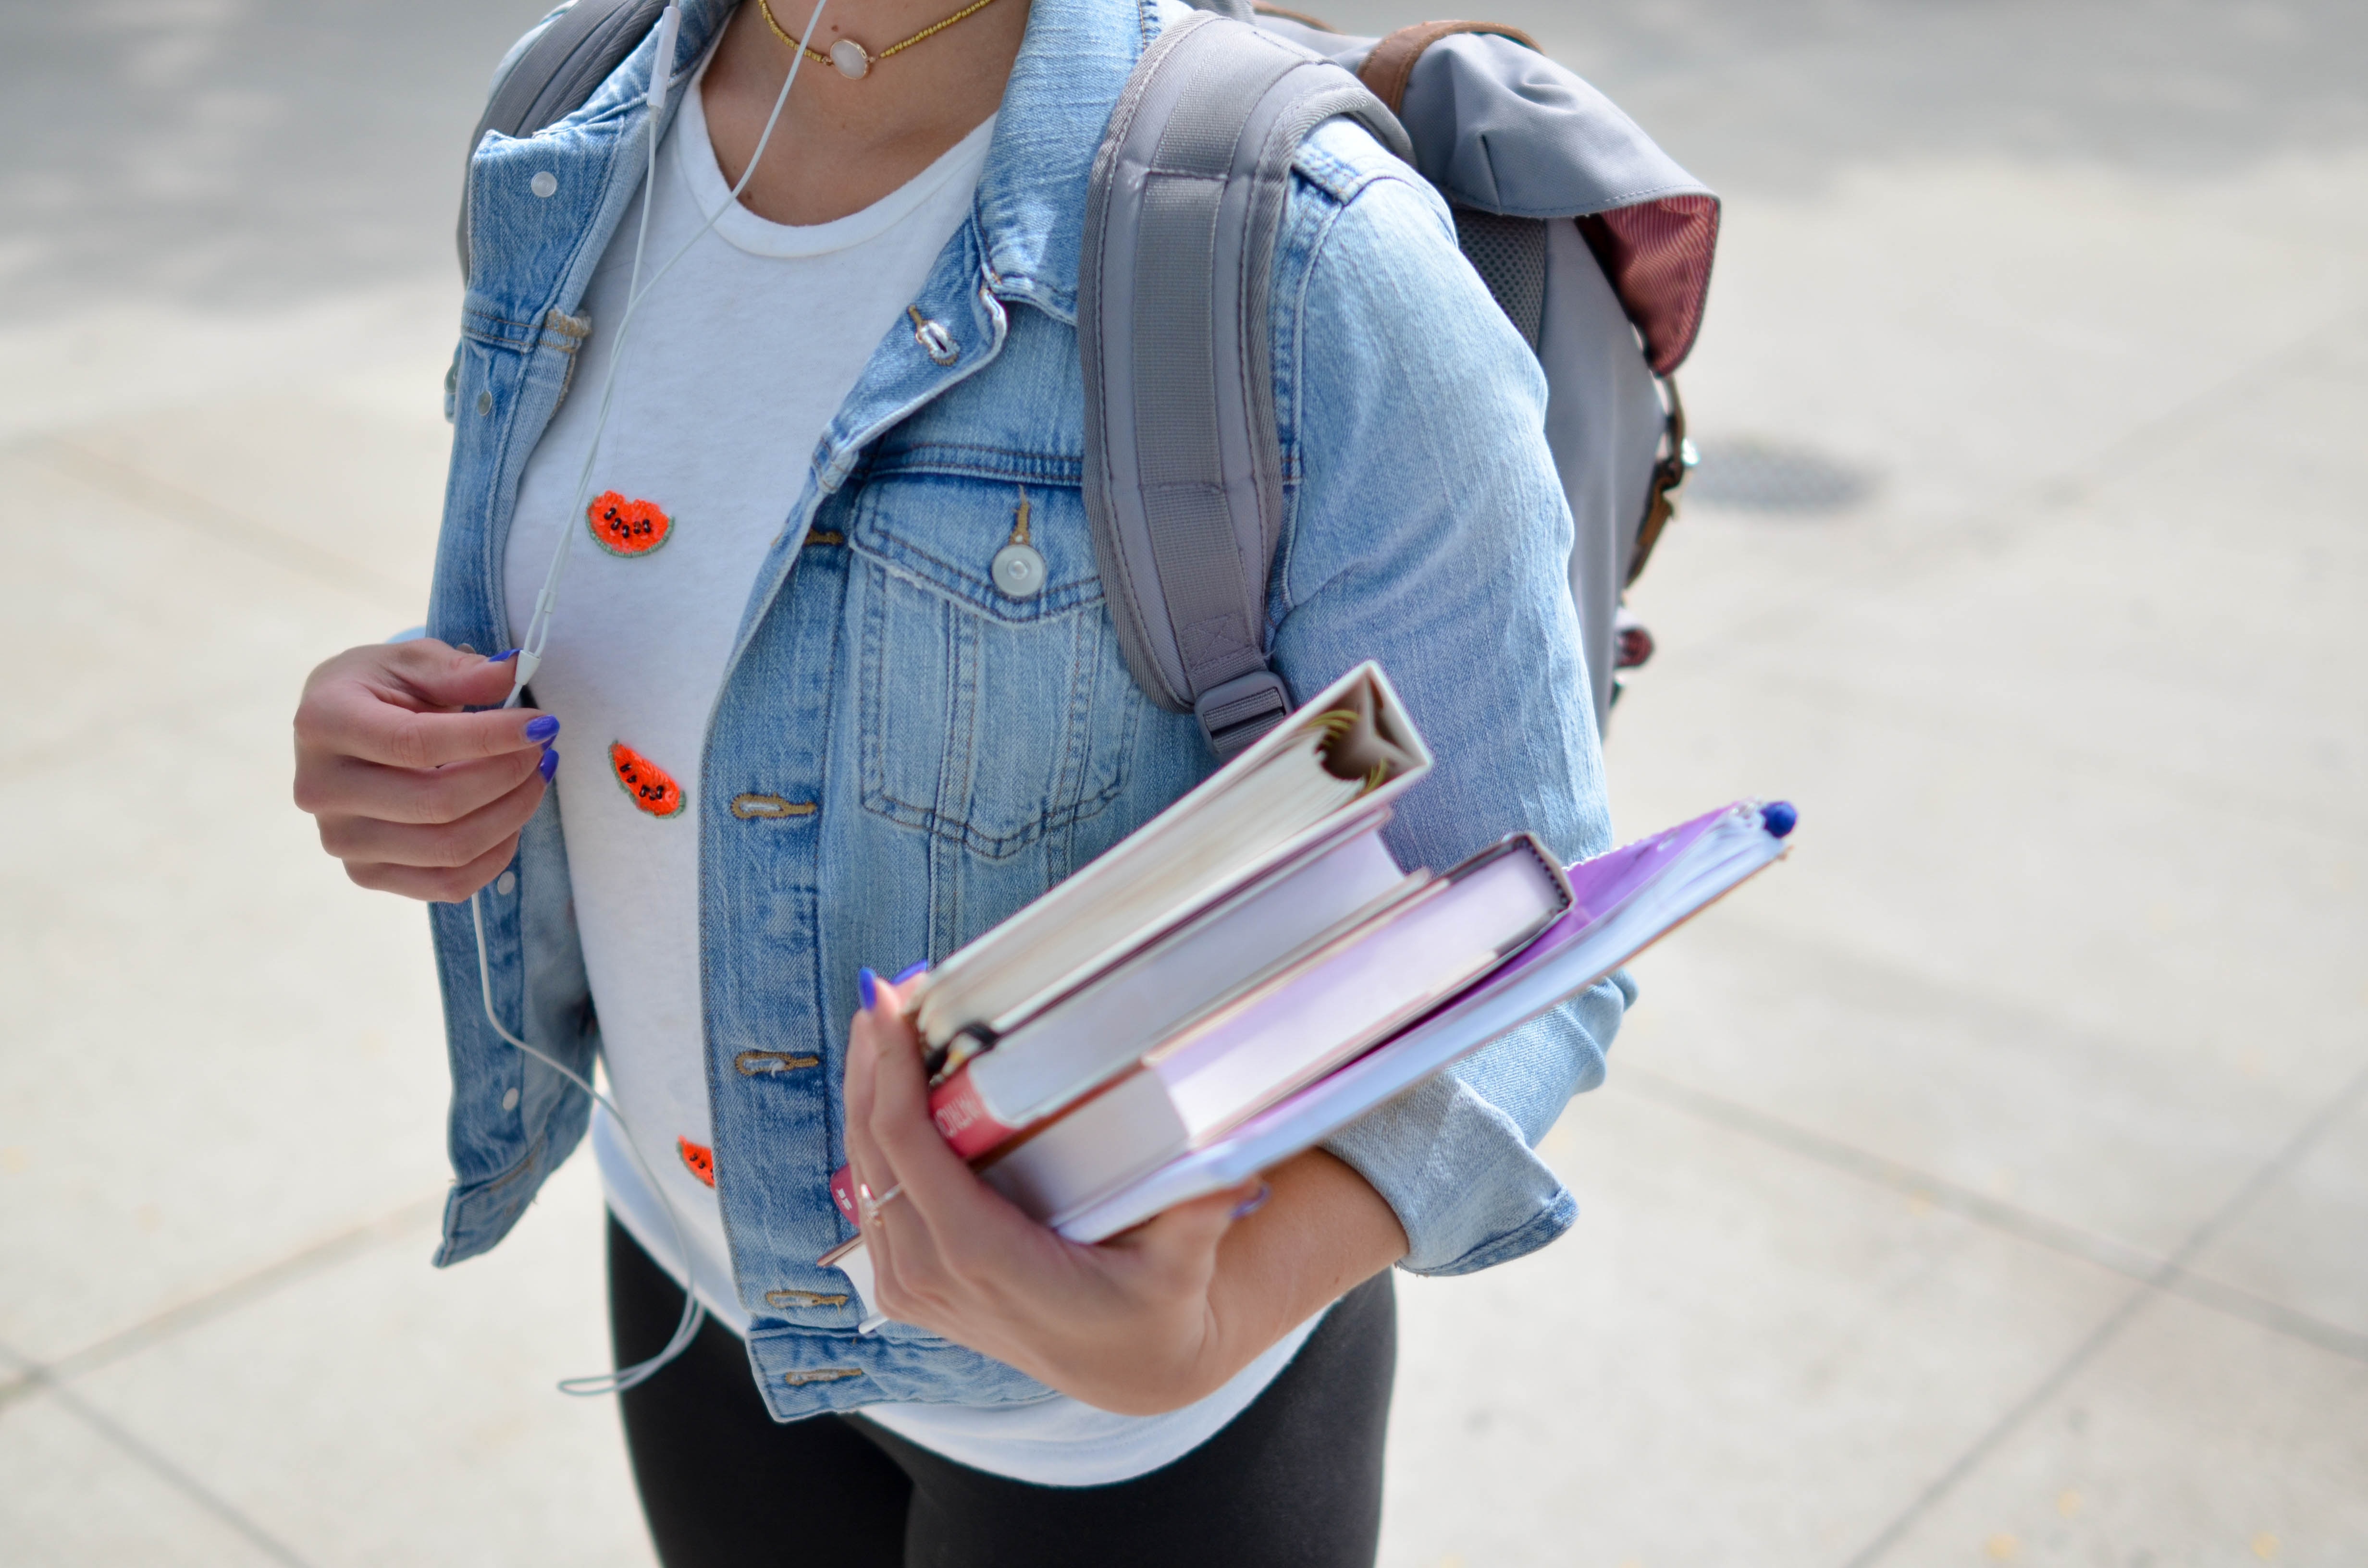 Female student carrying books and backpack wearing headphone